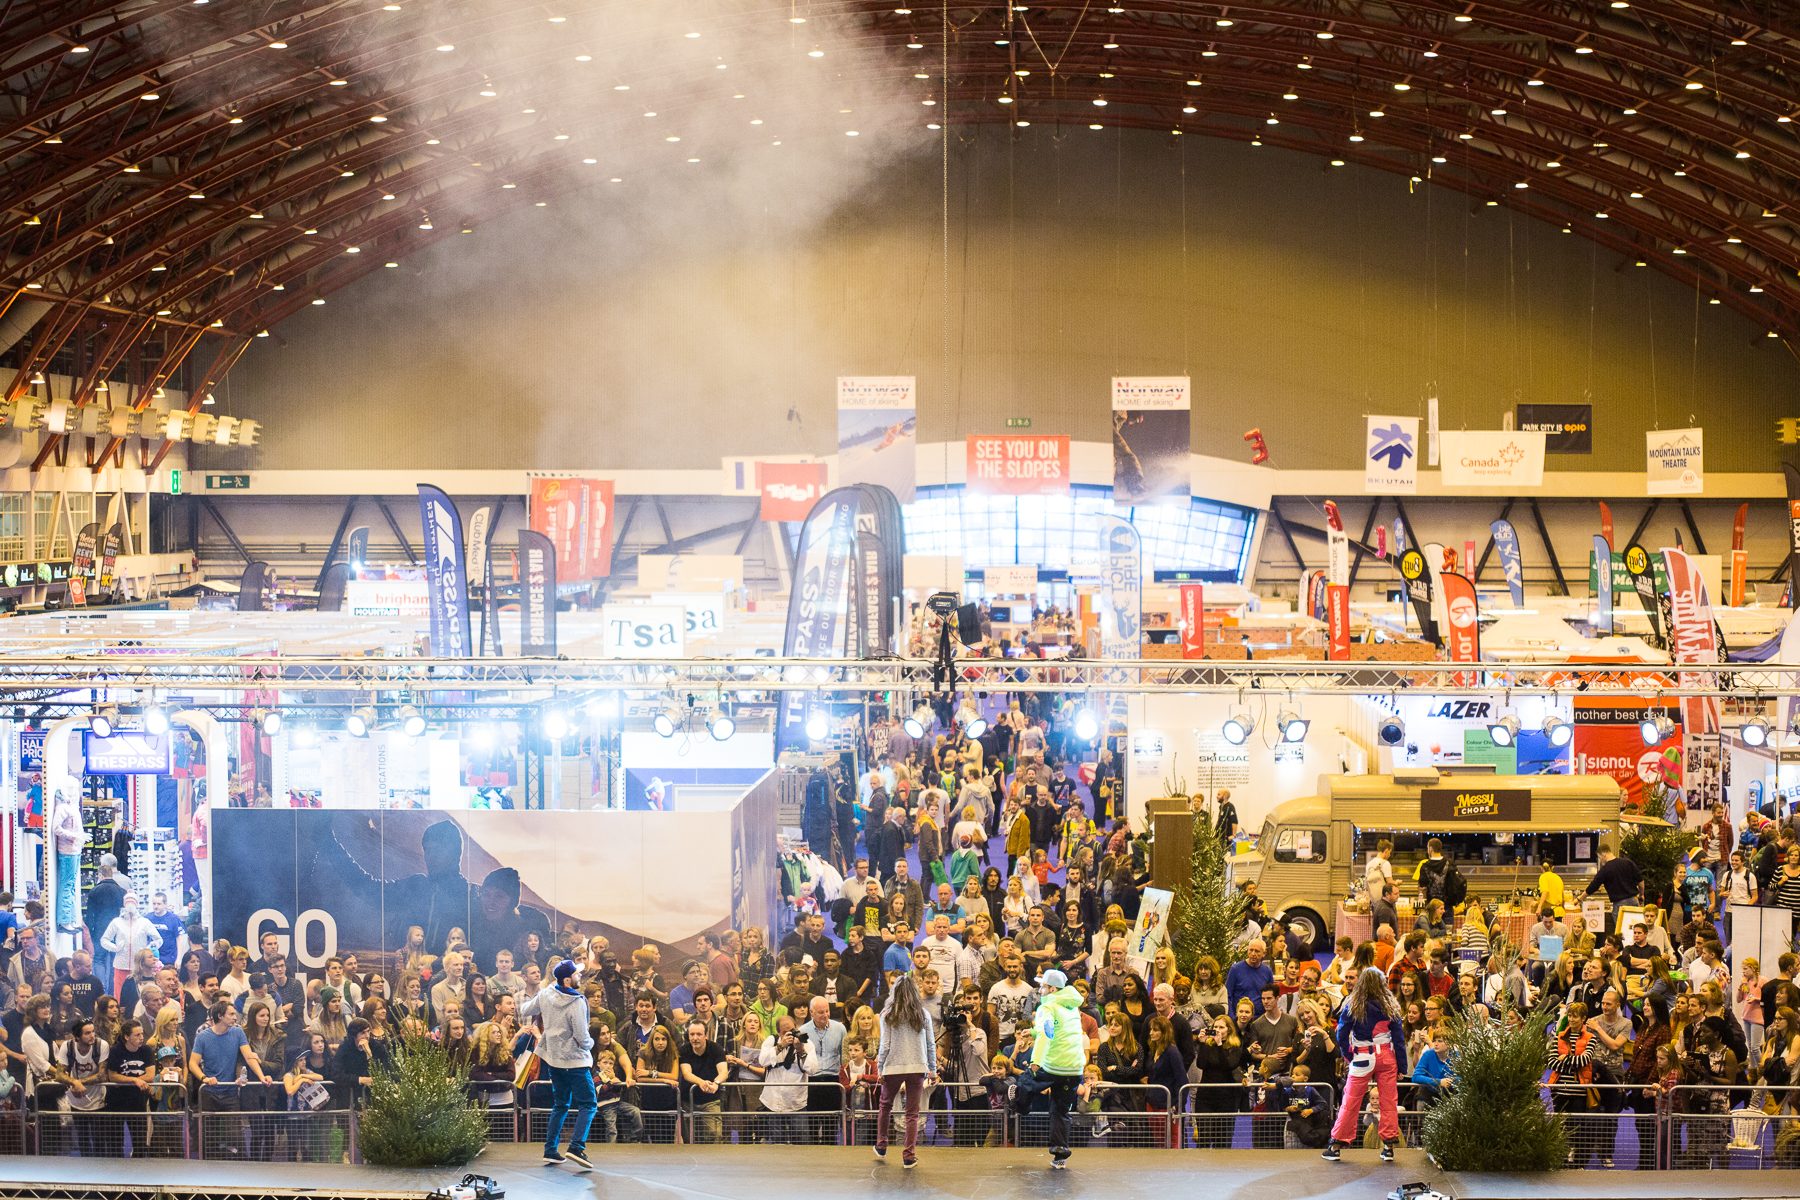 Manchester Ski Show Not Happening This Autumn Inthesnow within ski and snowboard show whistler for Invigorate